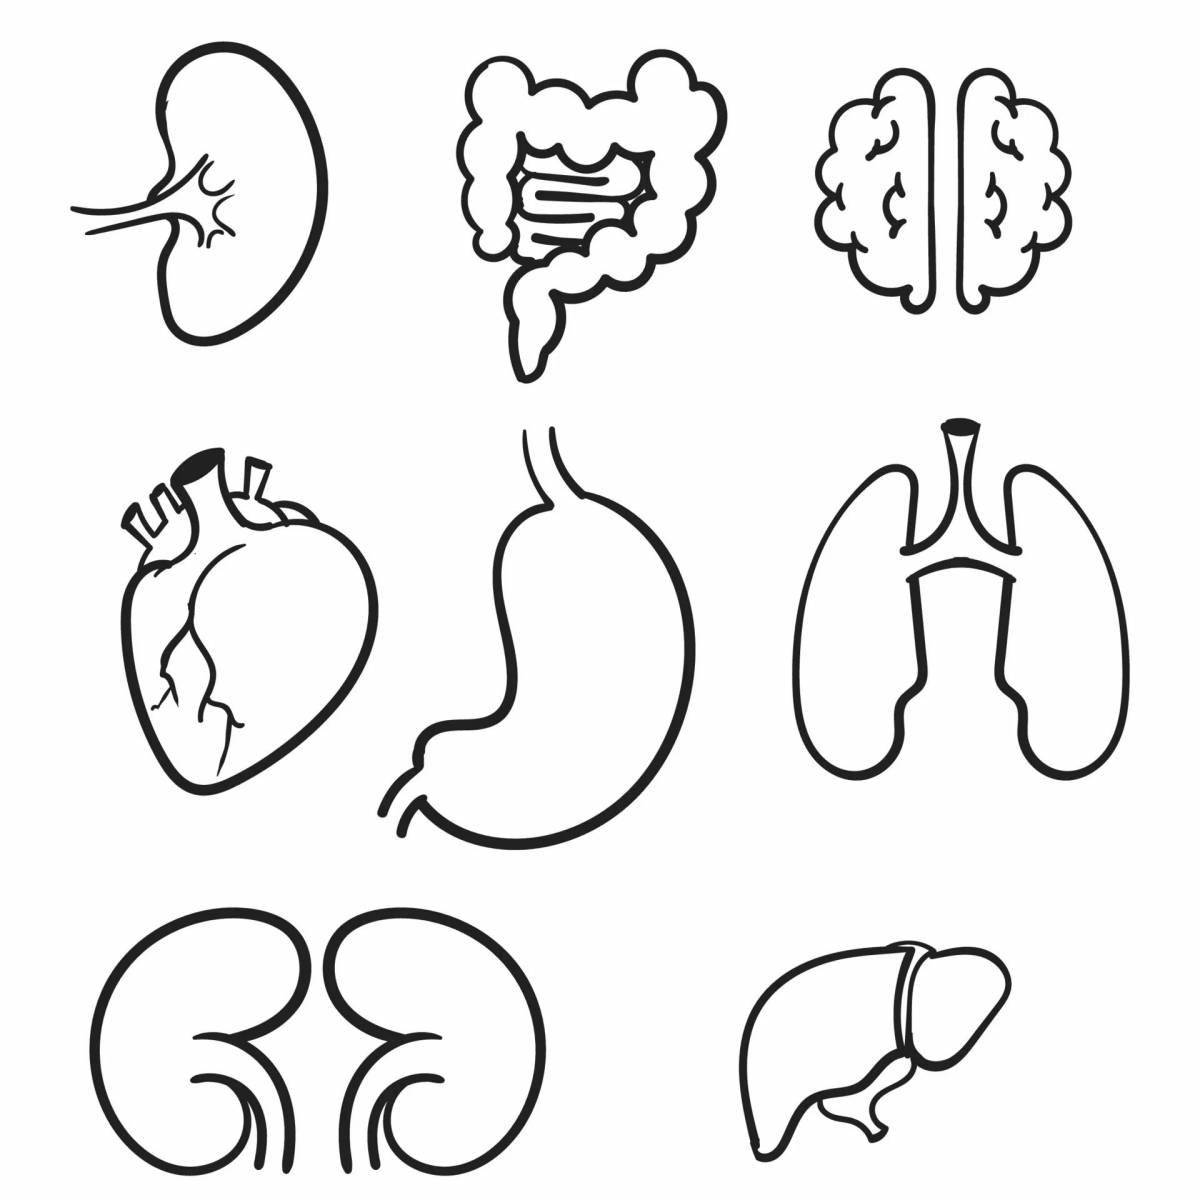 Drawing coloring pages of internal organs